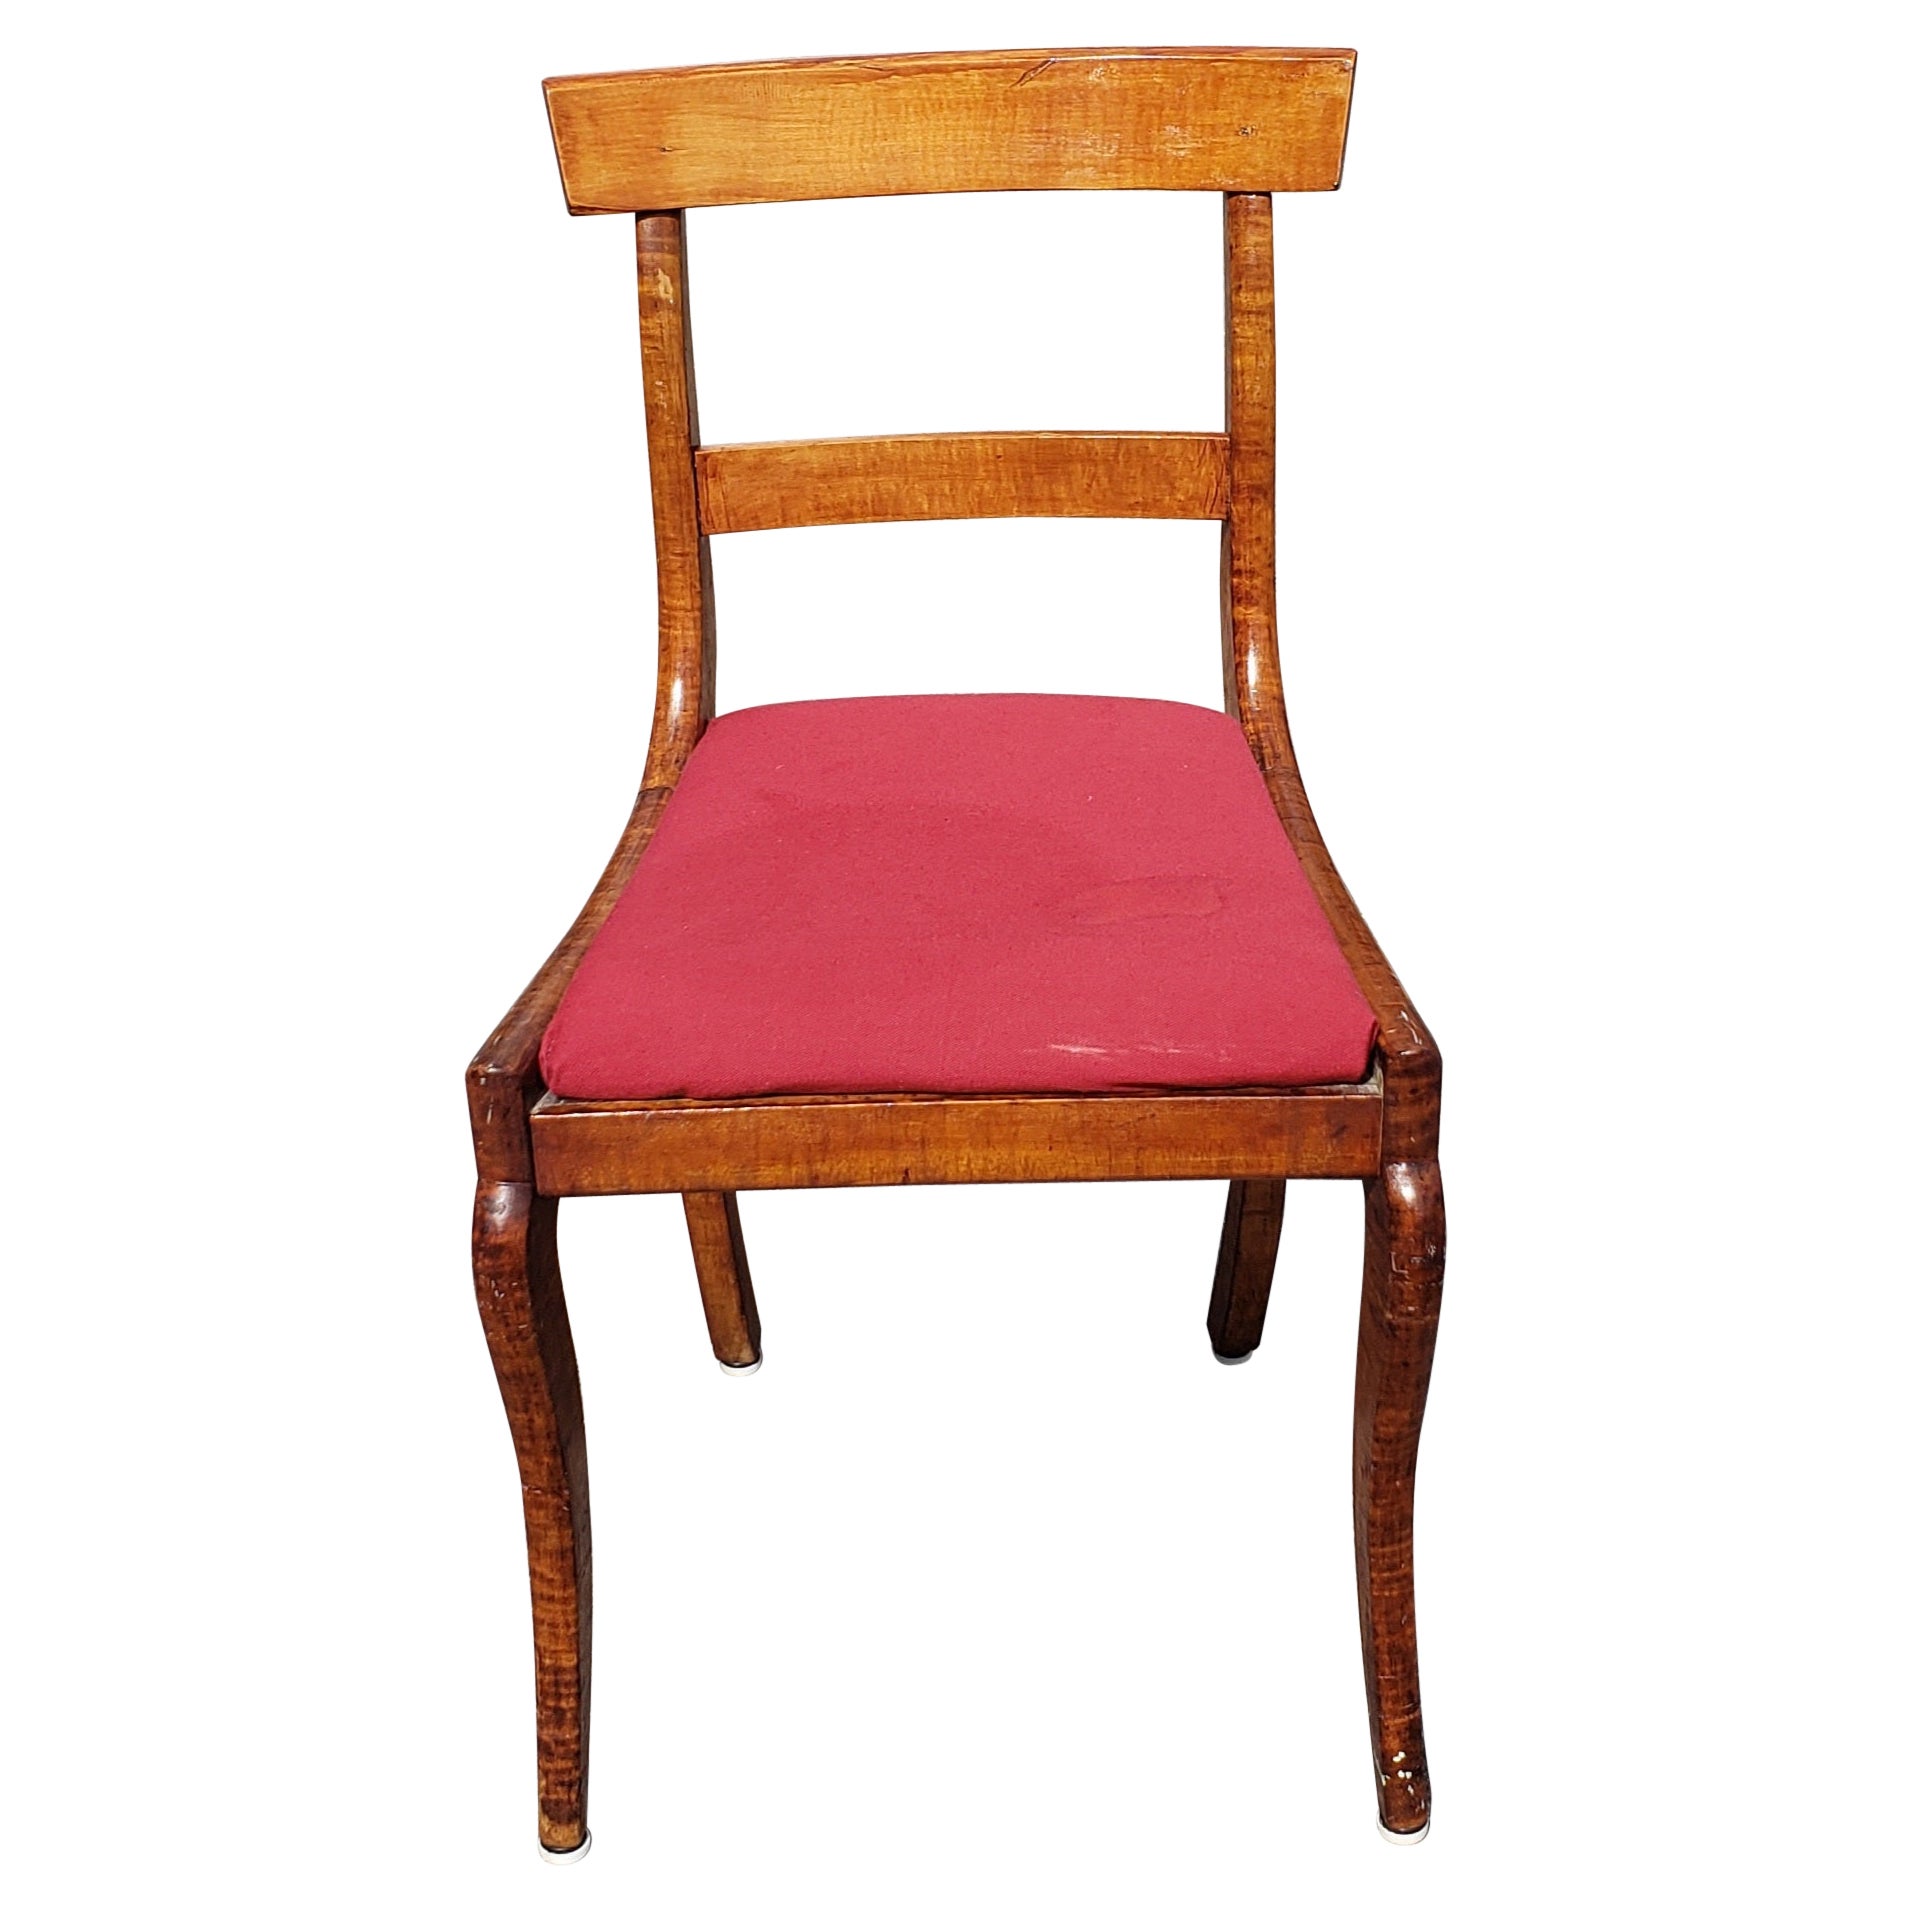 Antique Duncan Phyfe Tiger Maple Chair, Circa 1880s For Sale